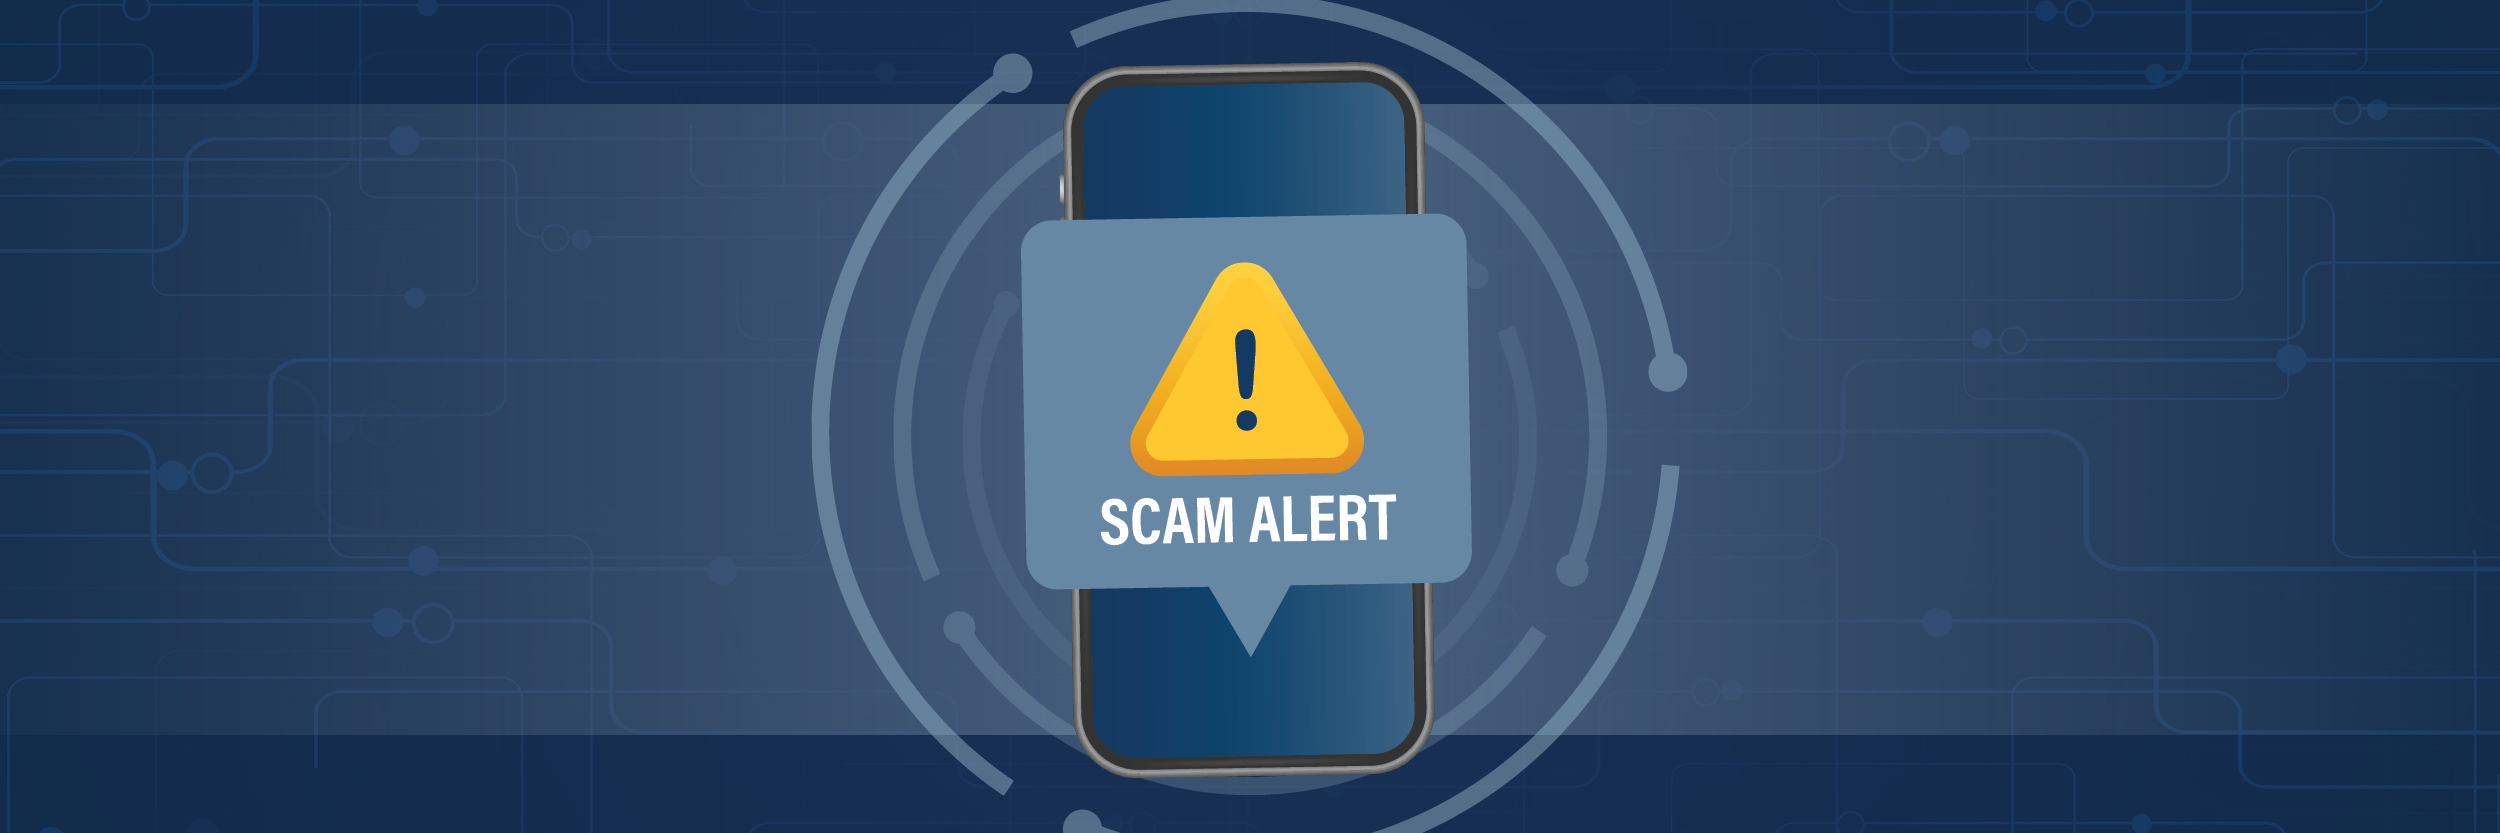 A cell phone with a yellow yield sign covering it and "scam alert" written below it.